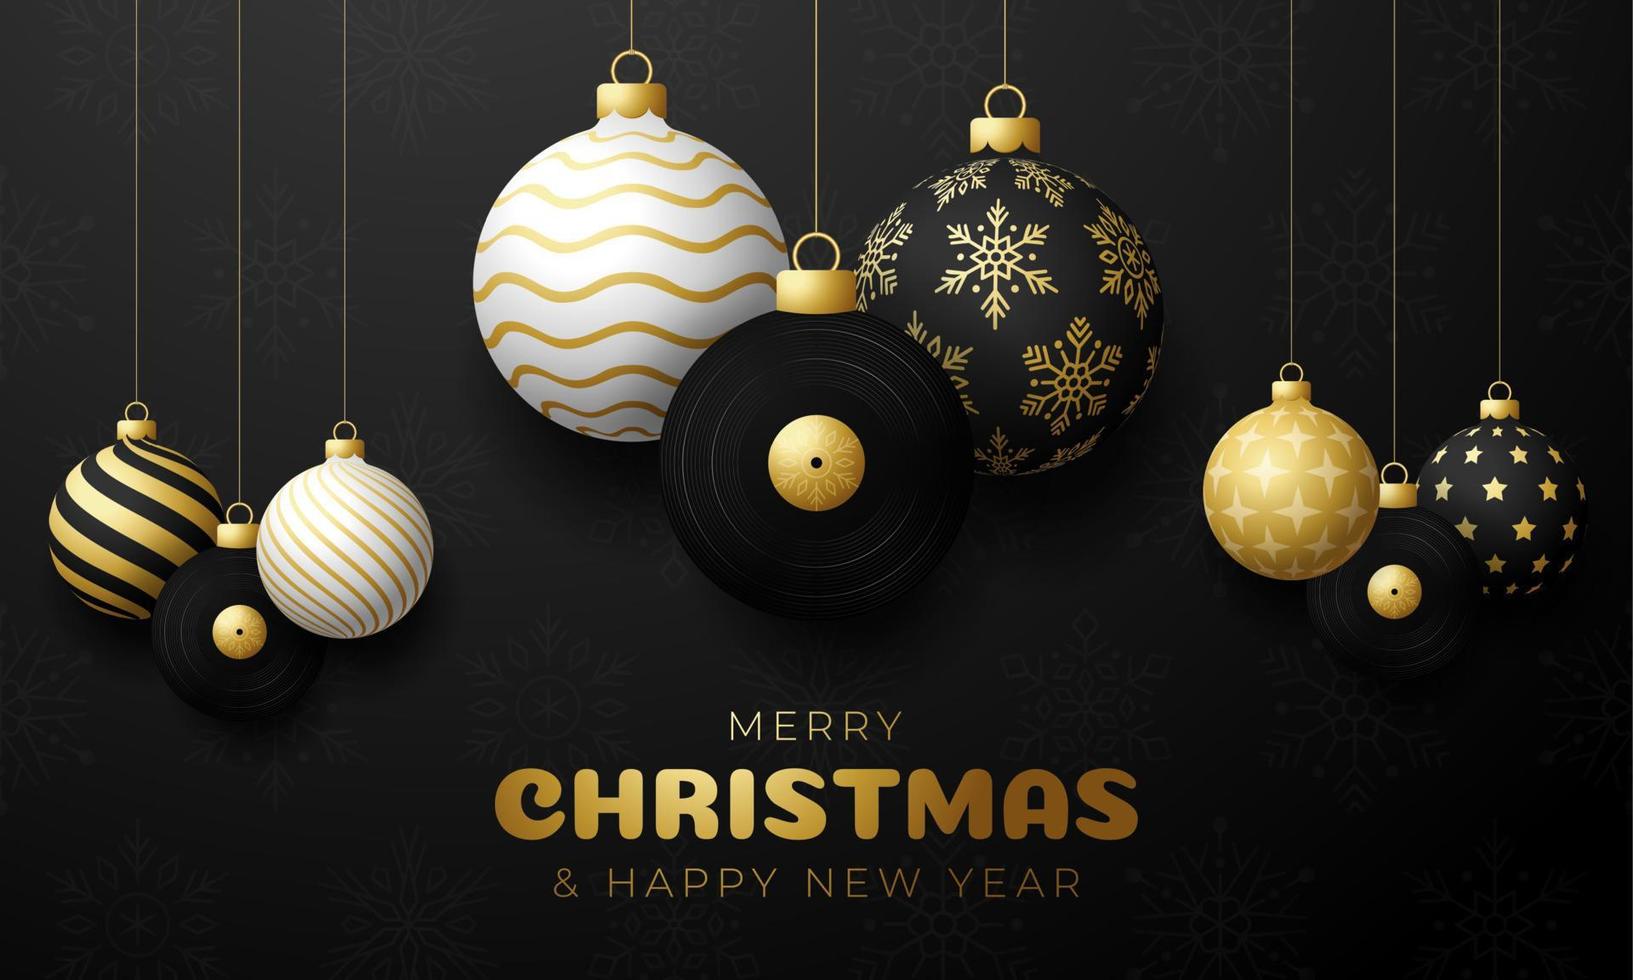 musical vinyl record Christmas card. Merry Christmas music greeting card. Hang on a thread vinyl record as a xmas ball and golden bauble on black background. musical Vector illustration.